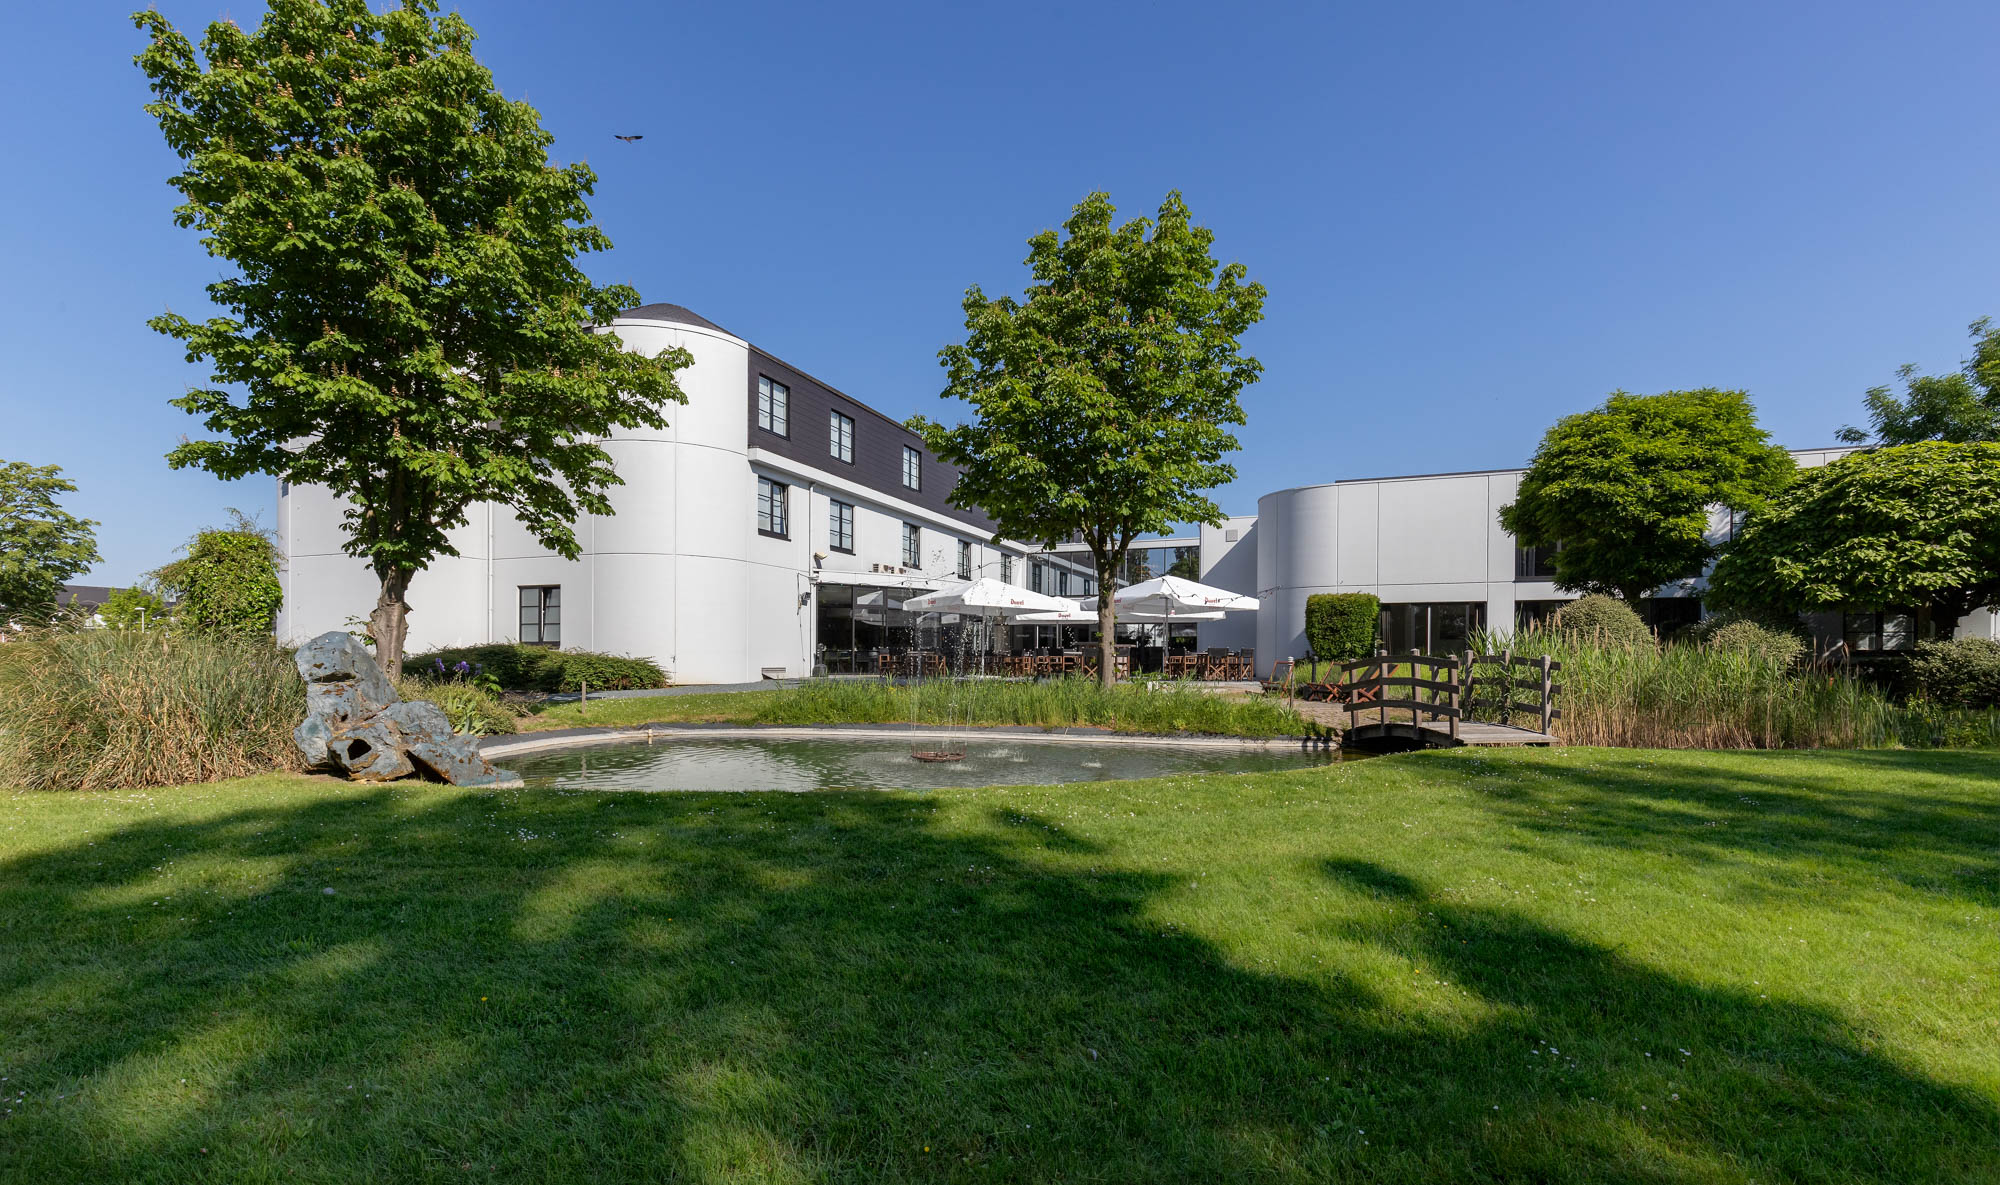 Hotel ter Elst <br/>89.00 ew <br/> <a href='http://vakantieoplossing.nl/outpage/?id=f4f2b81653e242d65c15b5222aad51a0' target='_blank'>View Details</a>